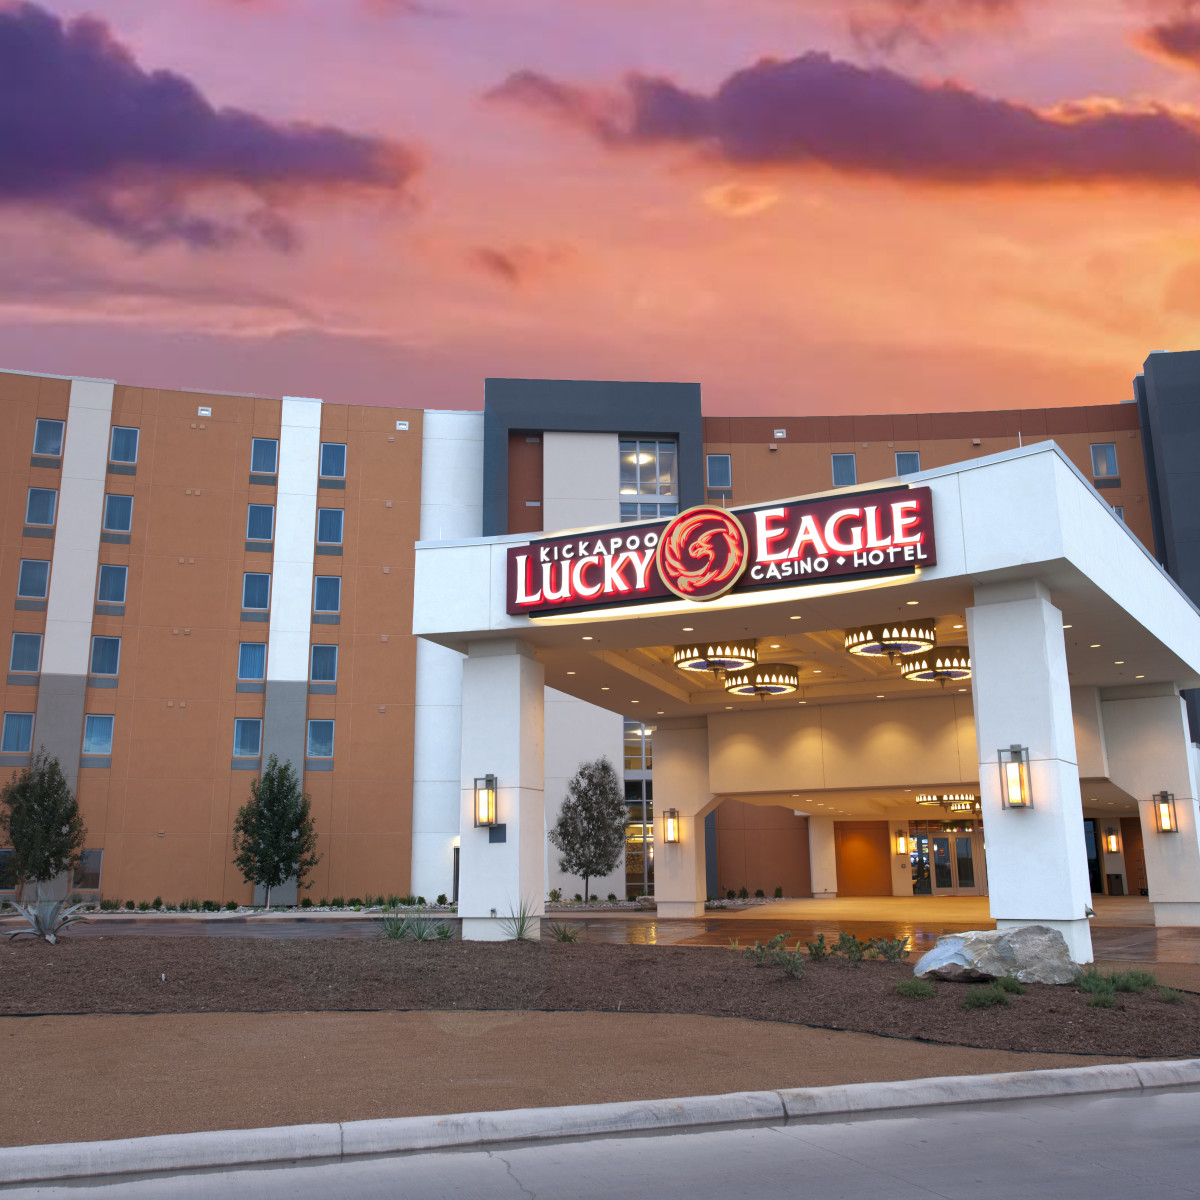 See all the big ways this South Texas casino is welcoming spring